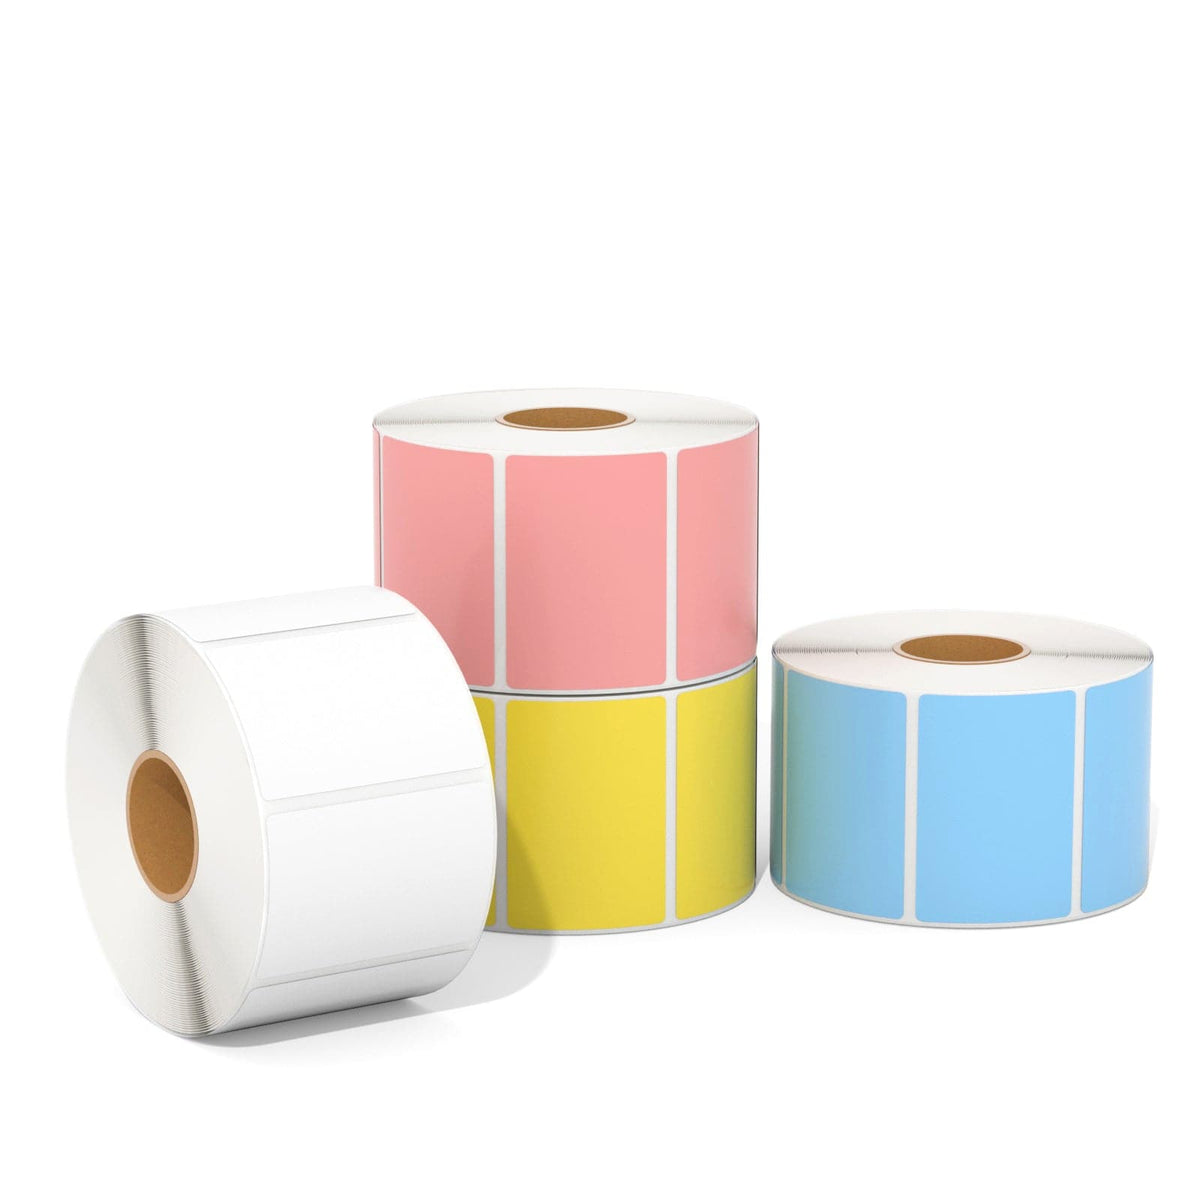 Lab Labeling Tape Variety Pack, 500 Length x 3/4 Width, 1 inch Core [3 Rolls of Assorted Colors]